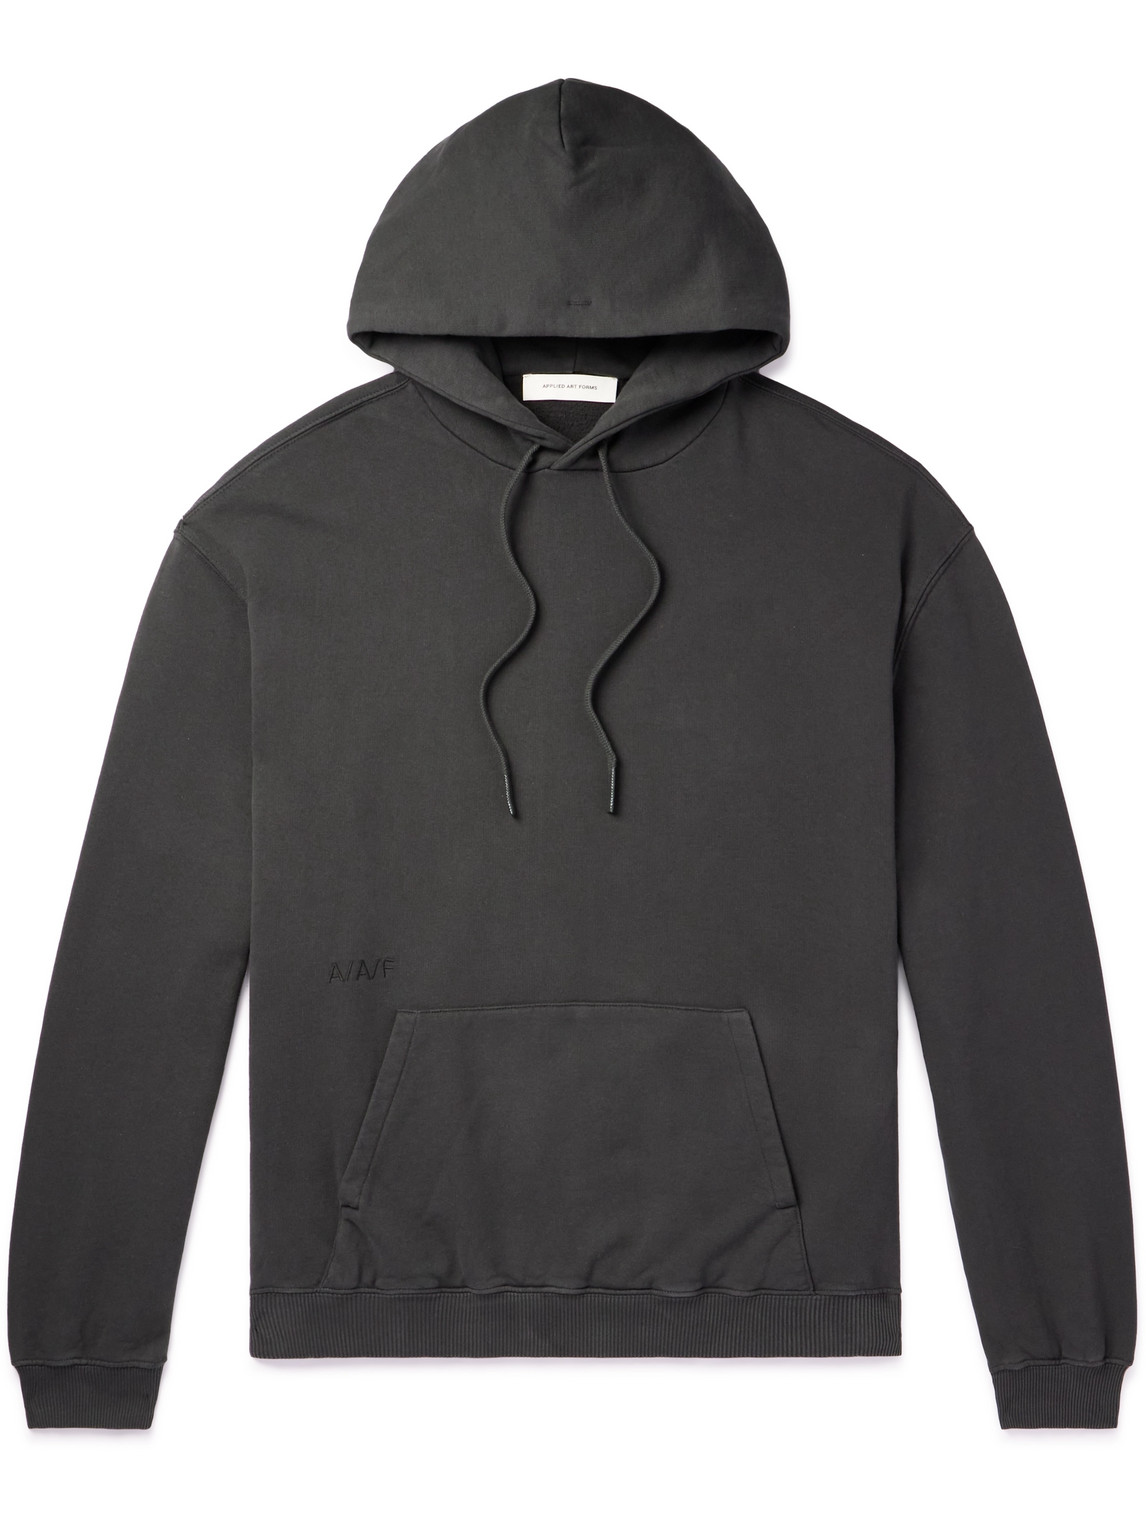 Applied Art Forms NM2-2 Oversized Cotton-Jersey Hoodie